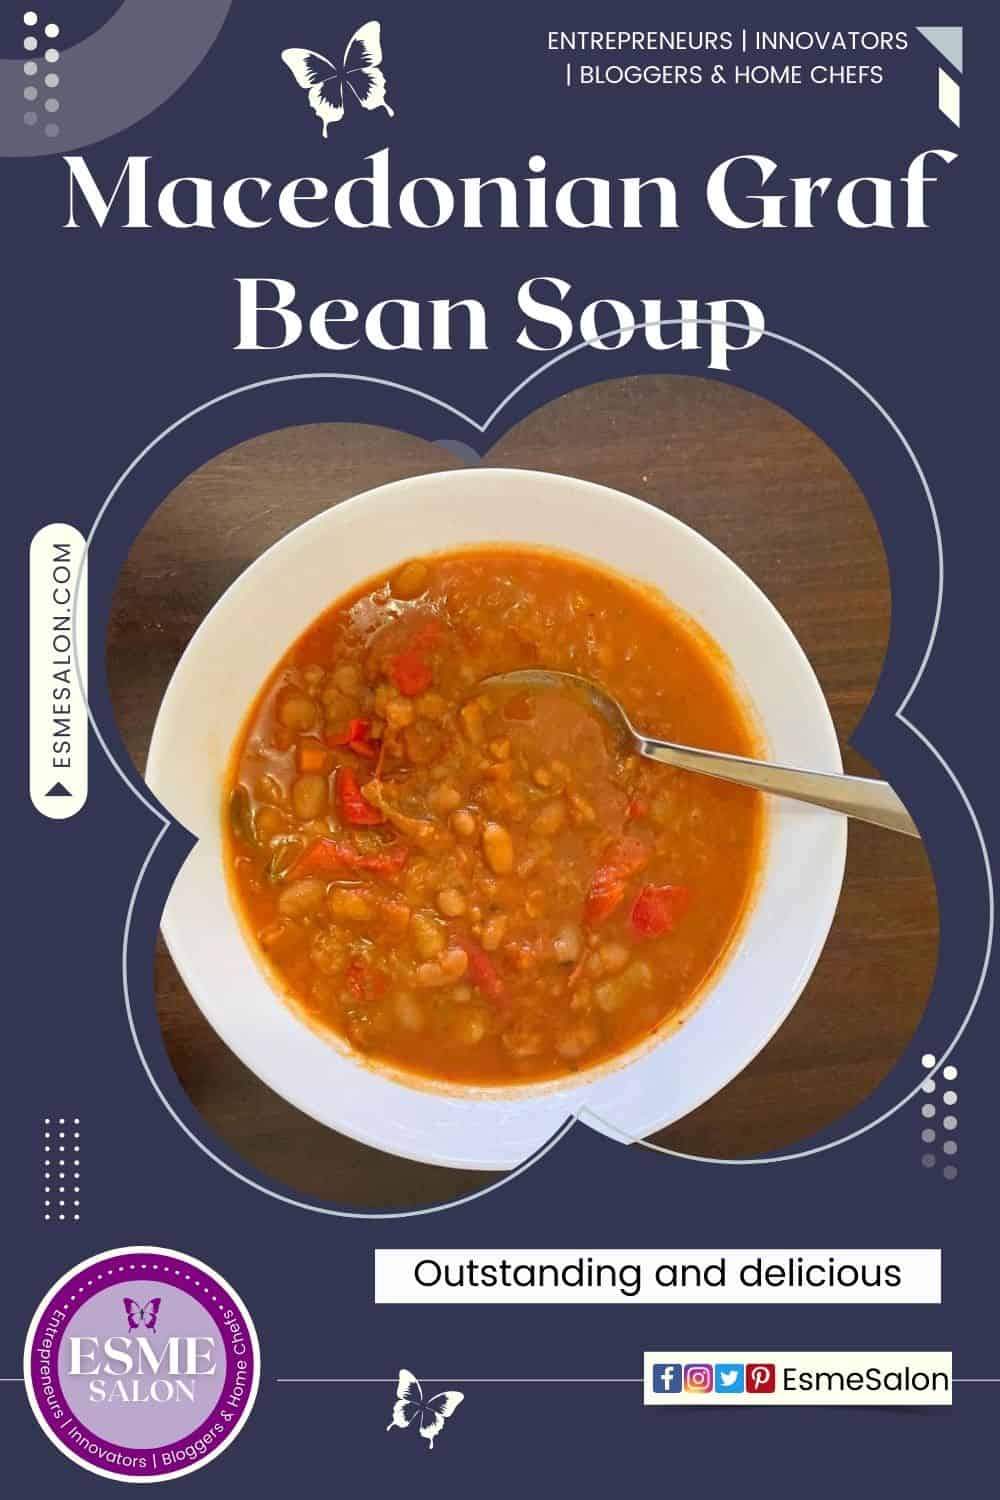 An image of a white bowl of Macedonian No Meat Graf Bean Soup